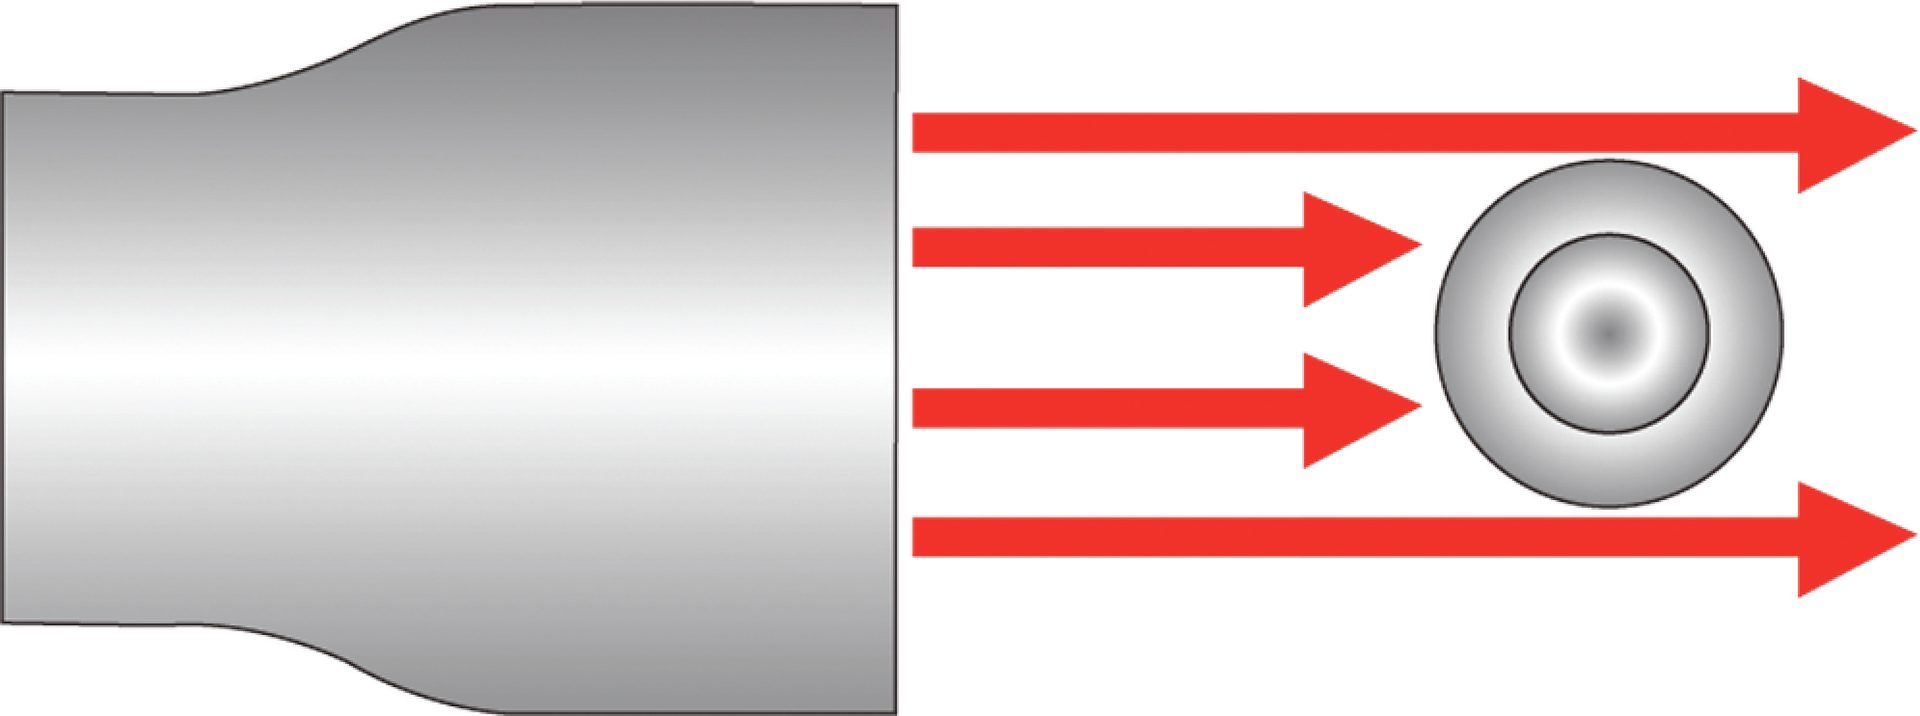 Figure 3. Telecentric illumination with parallel rays getting obscured by an opaque object